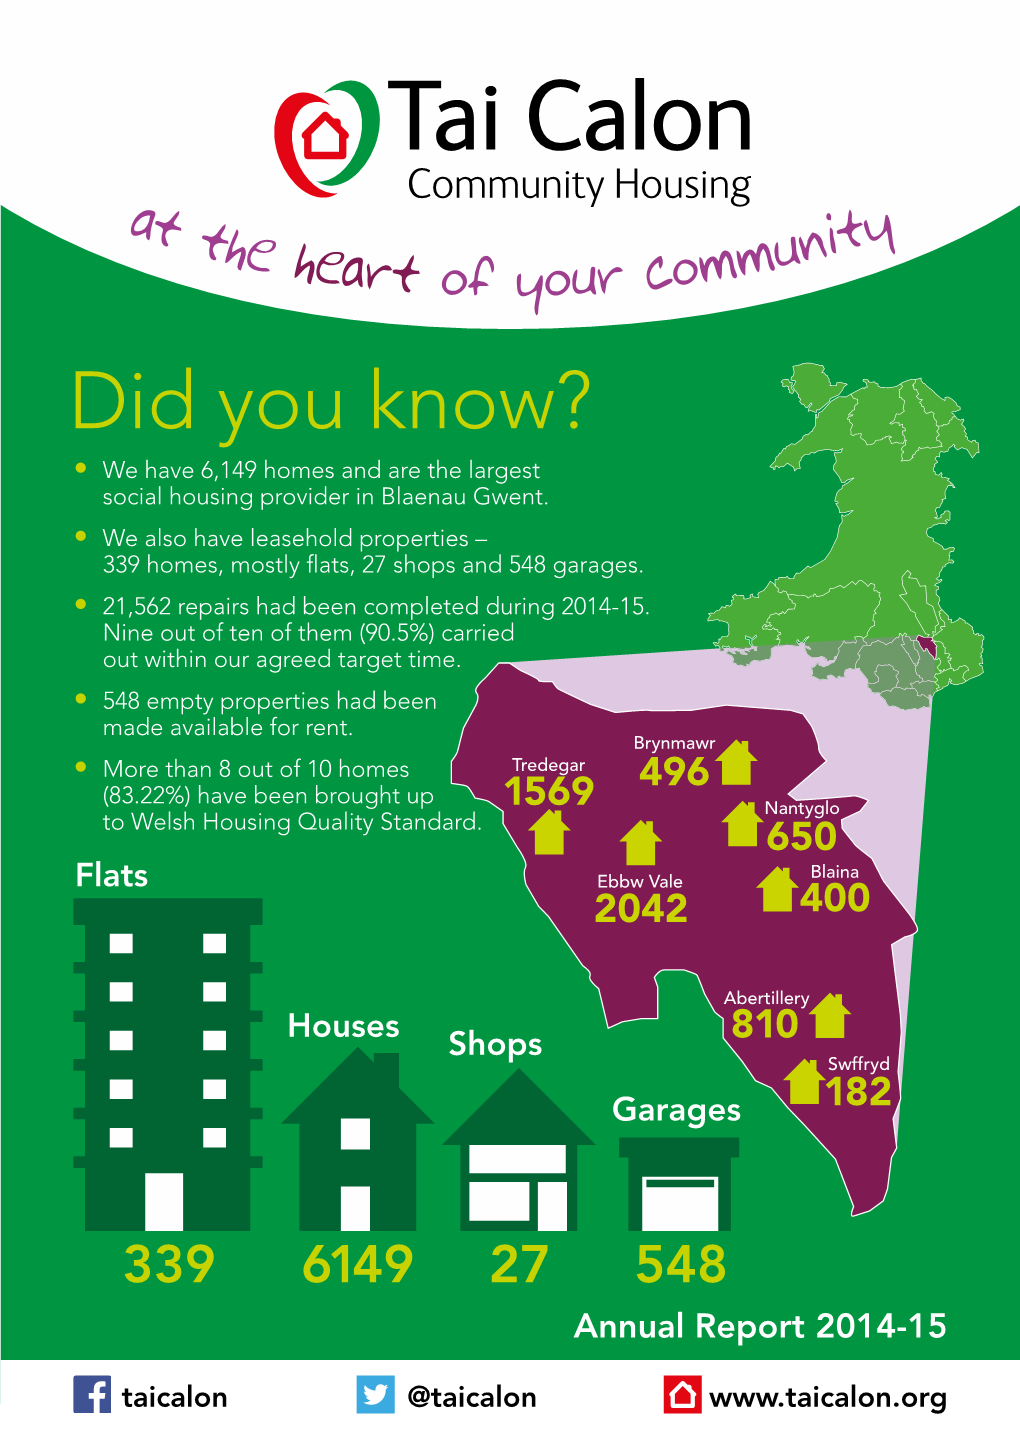 Did You Know? • We Have 6,149 Homes and Are the Largest Social Housing Provider in Blaenau Gwent